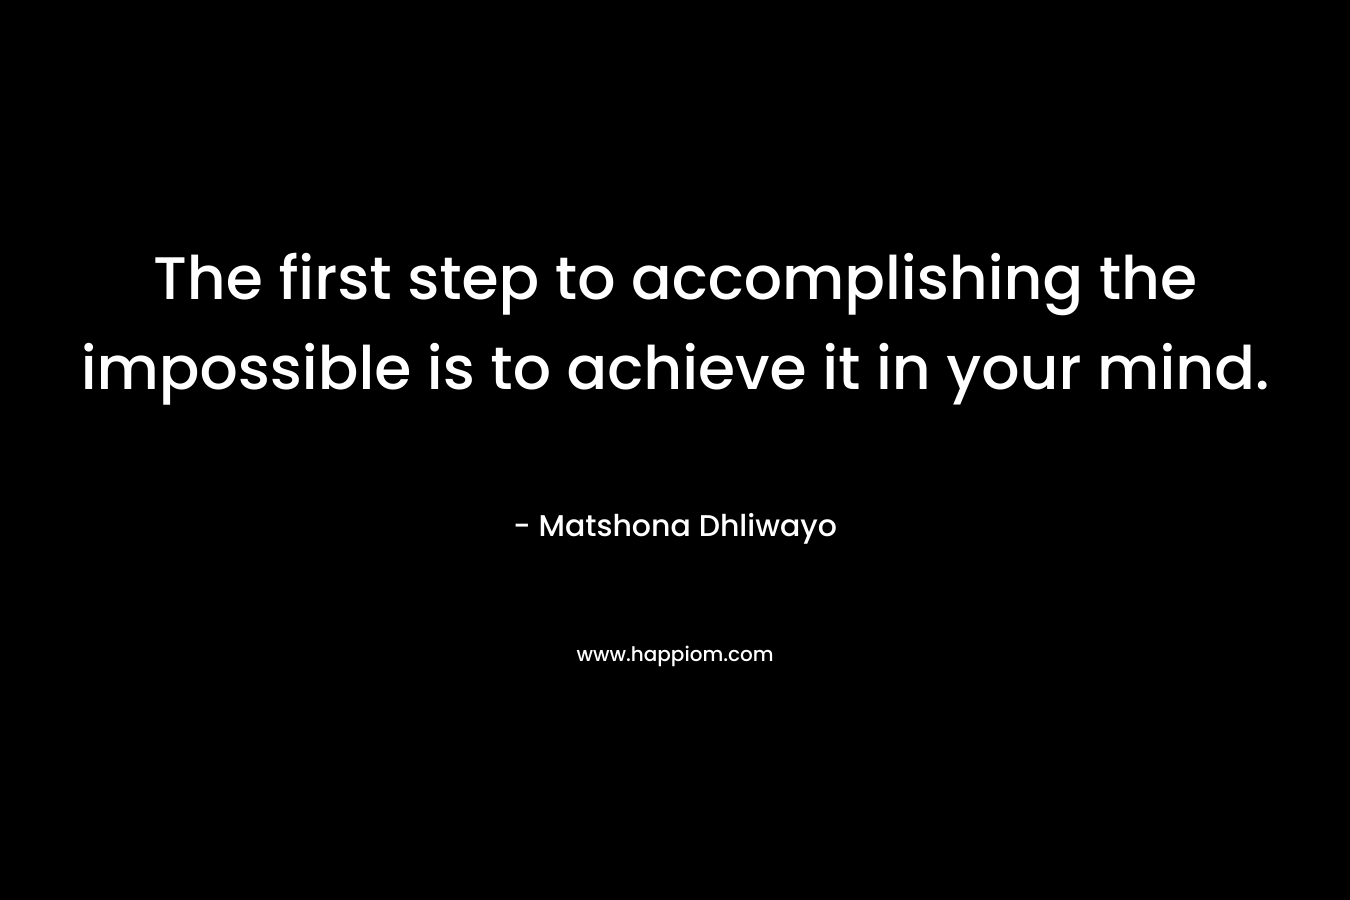 The first step to accomplishing the impossible is to achieve it in your mind.